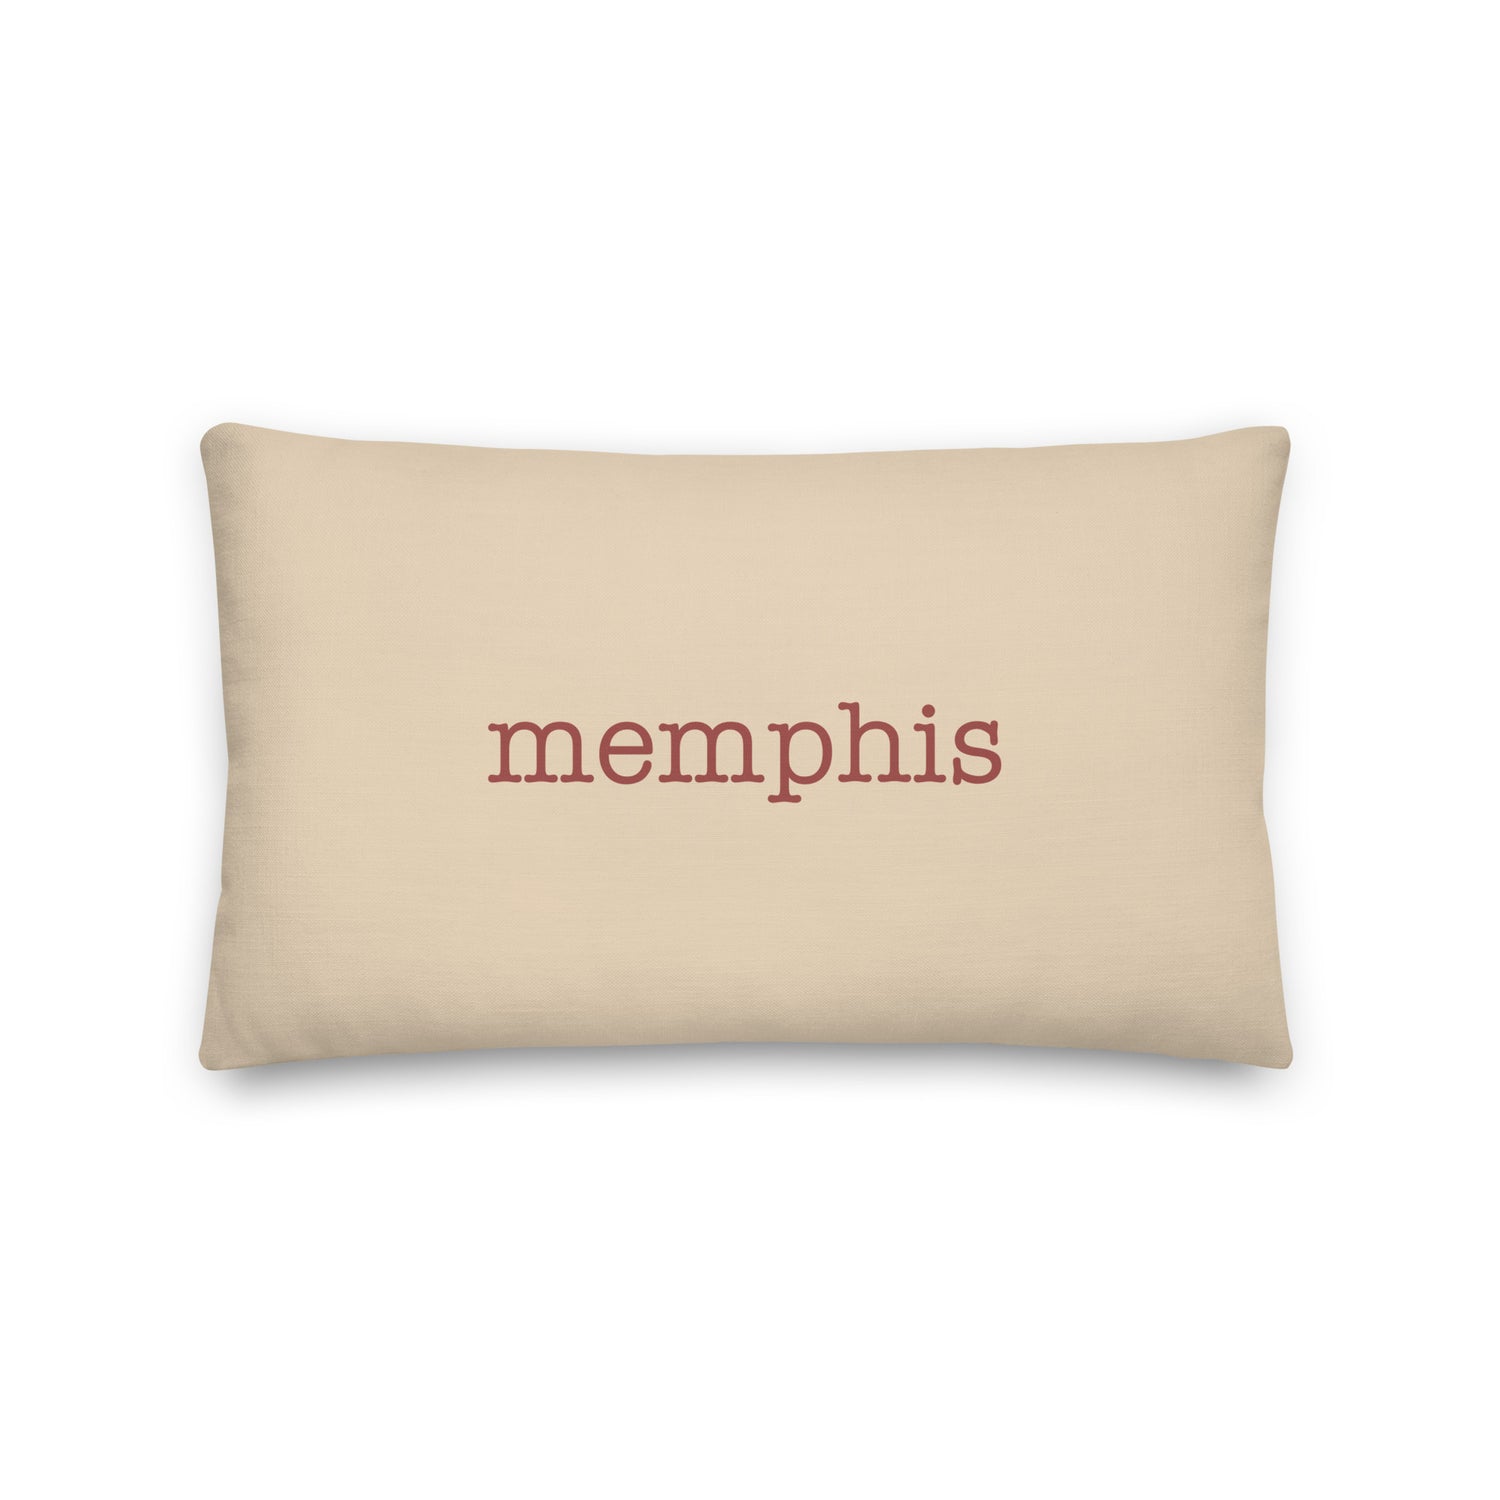 Memphis Tennessee Pillows and Blankets • MEM Airport Code